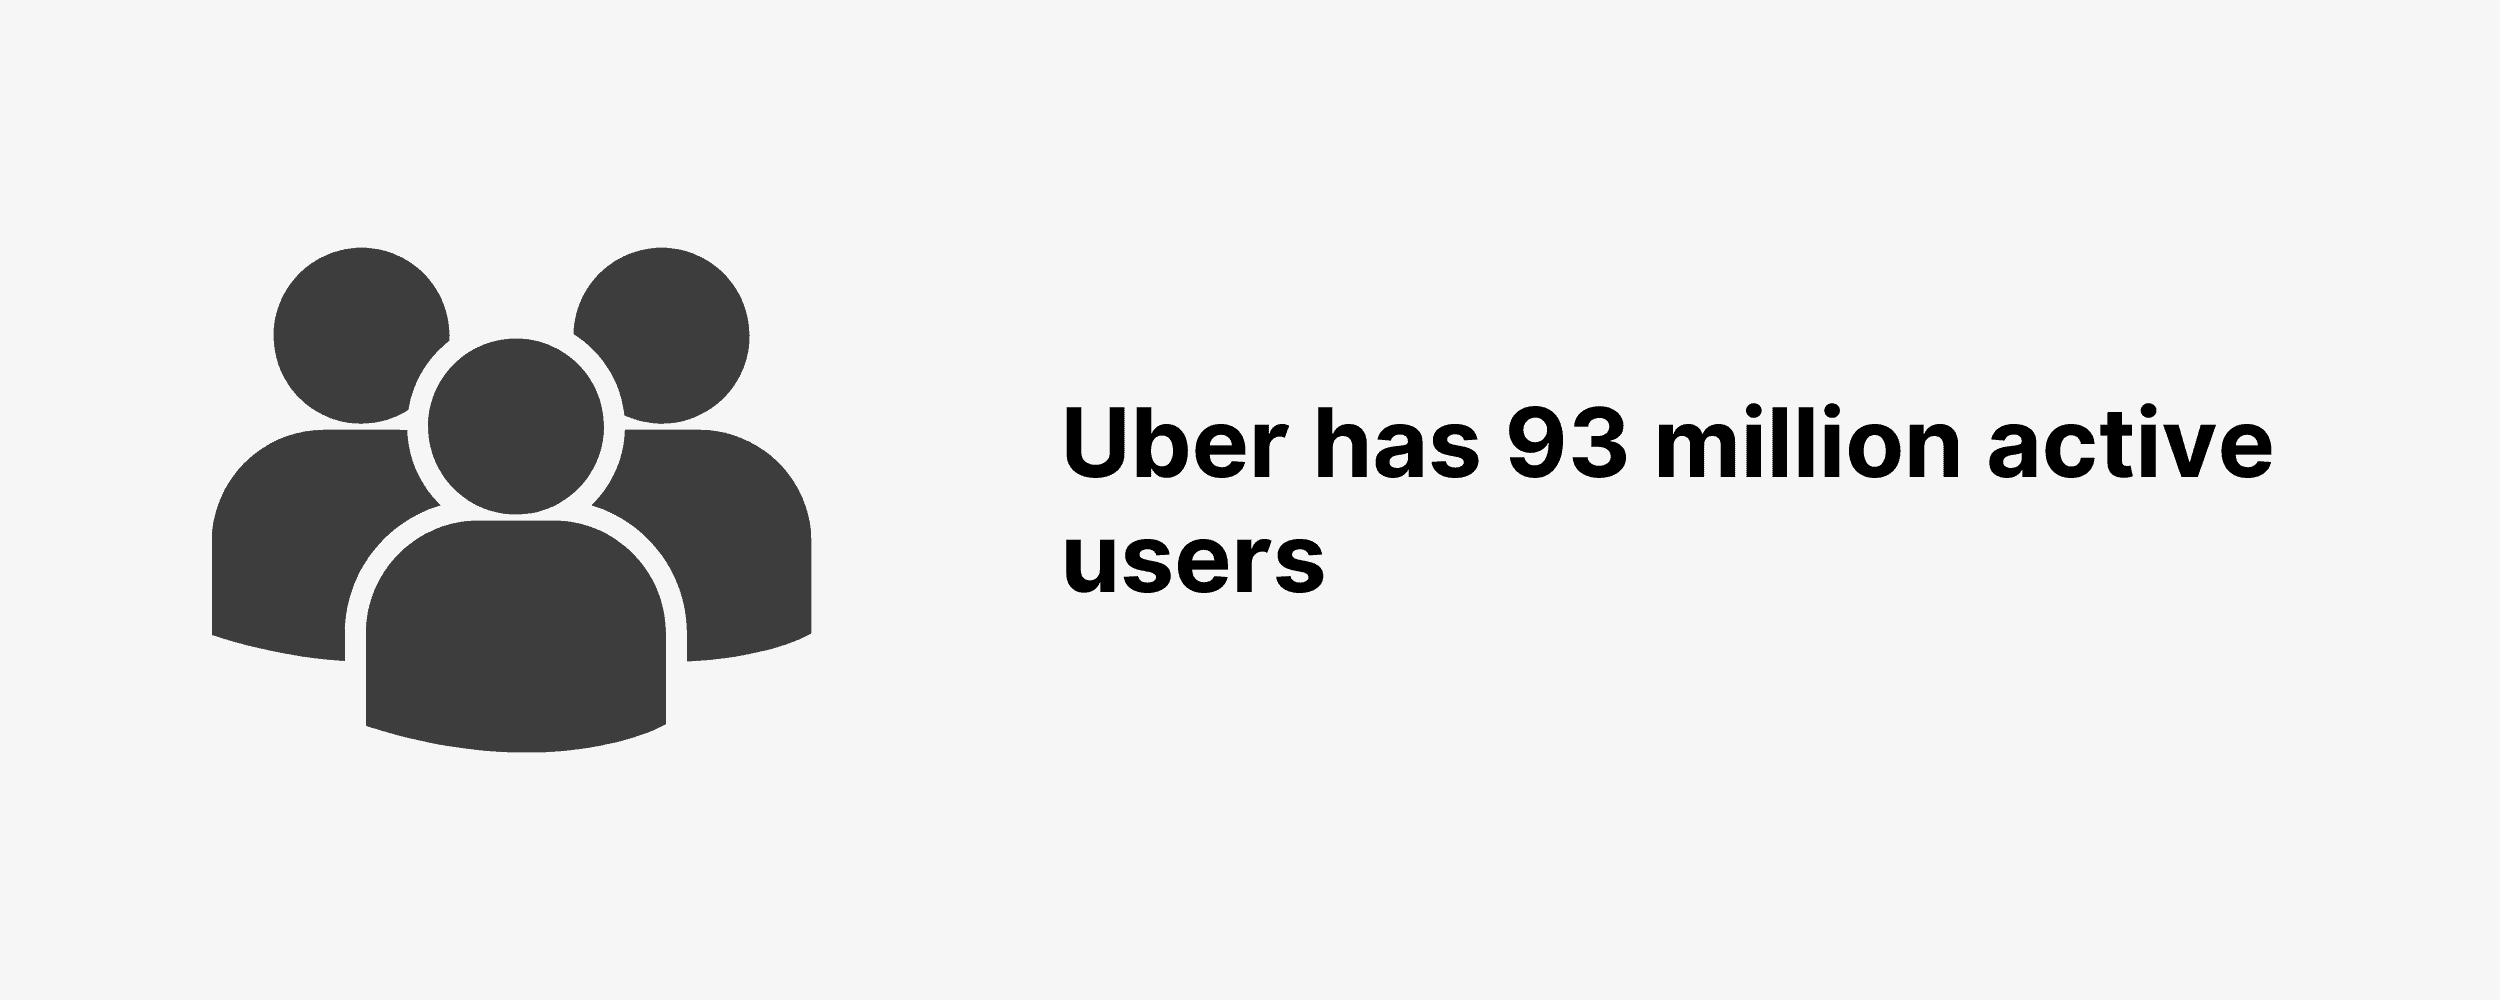 Uber has 93 million active users